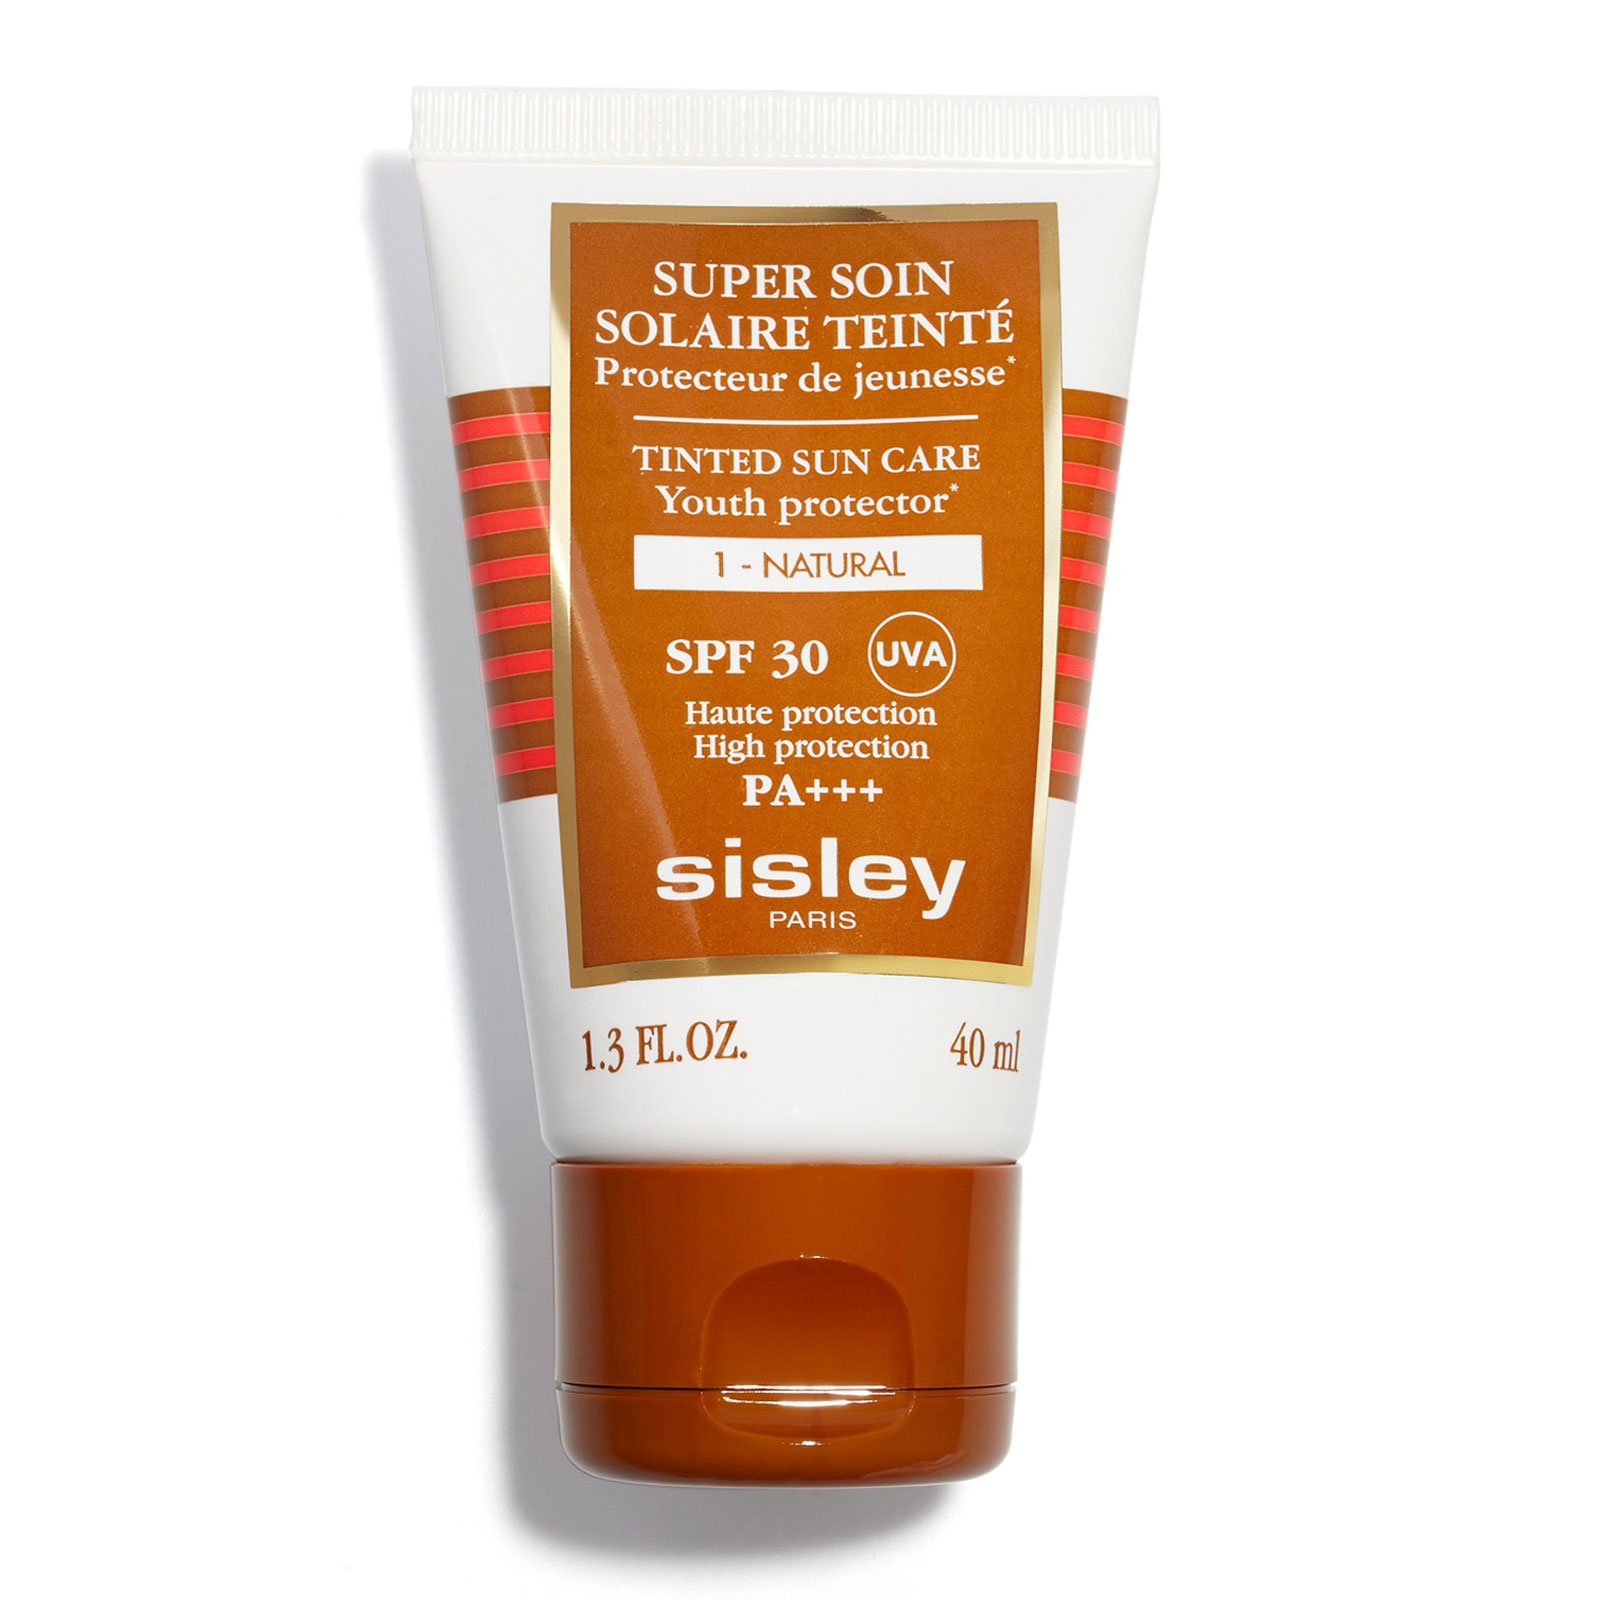 Sisley Super Soin Solaire Tinted Sun Care Spf30 40Ml 1 Natural